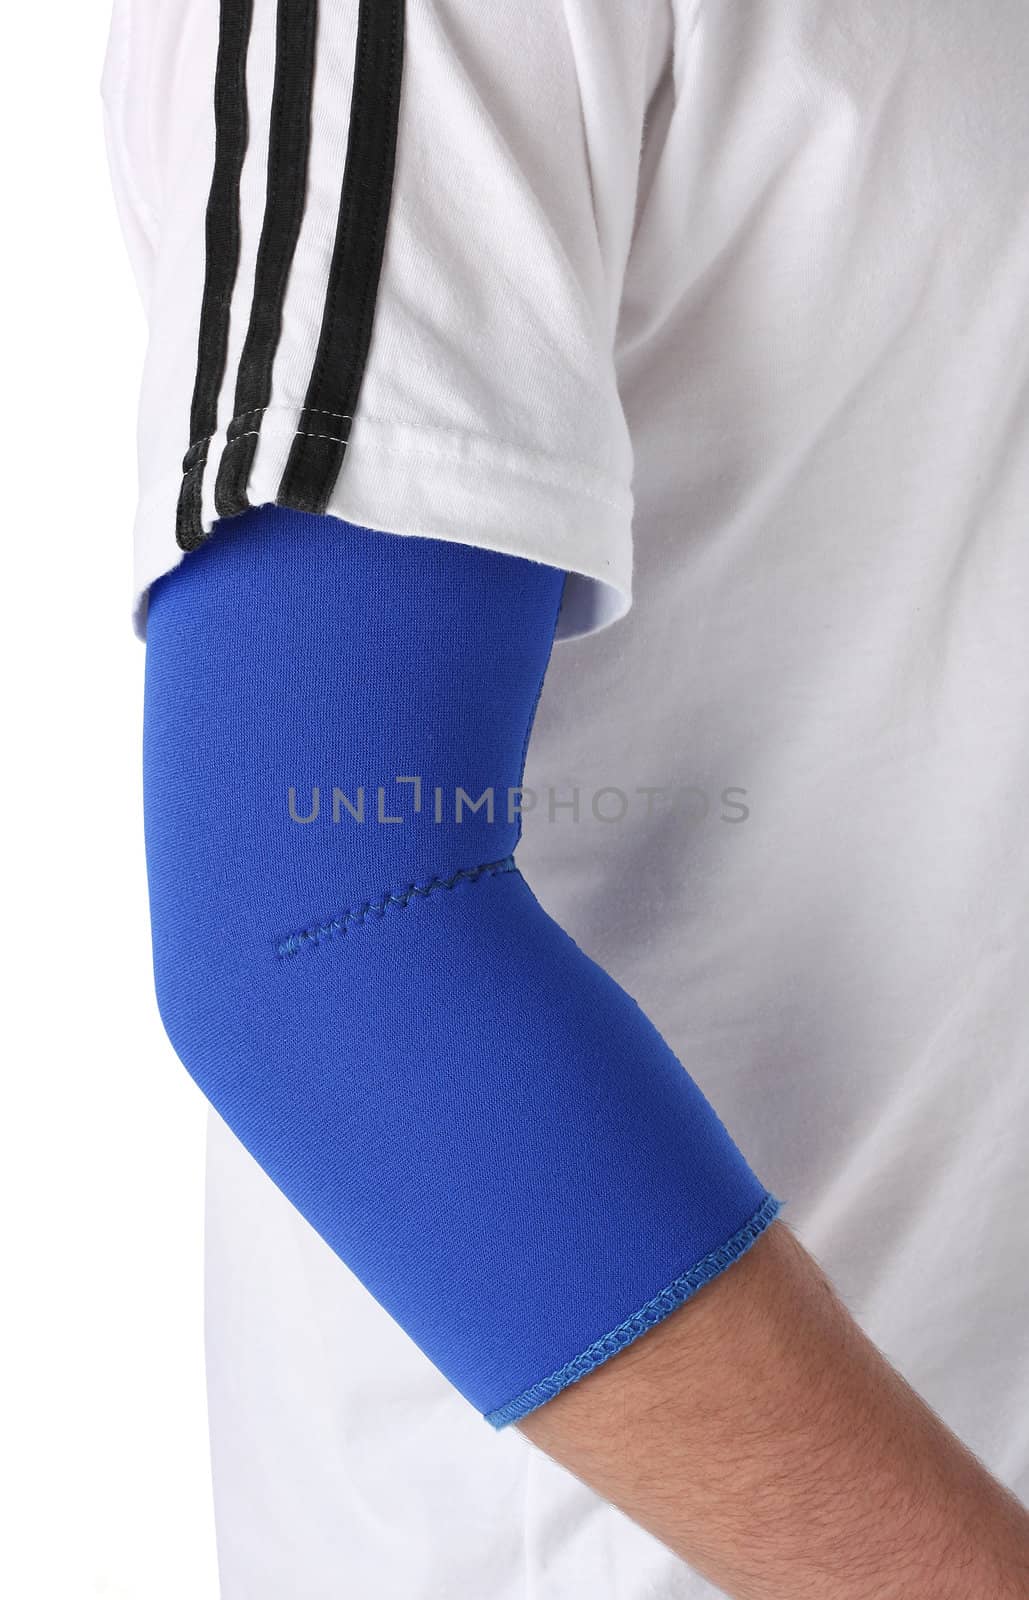 Man wearing an elbow brace over white